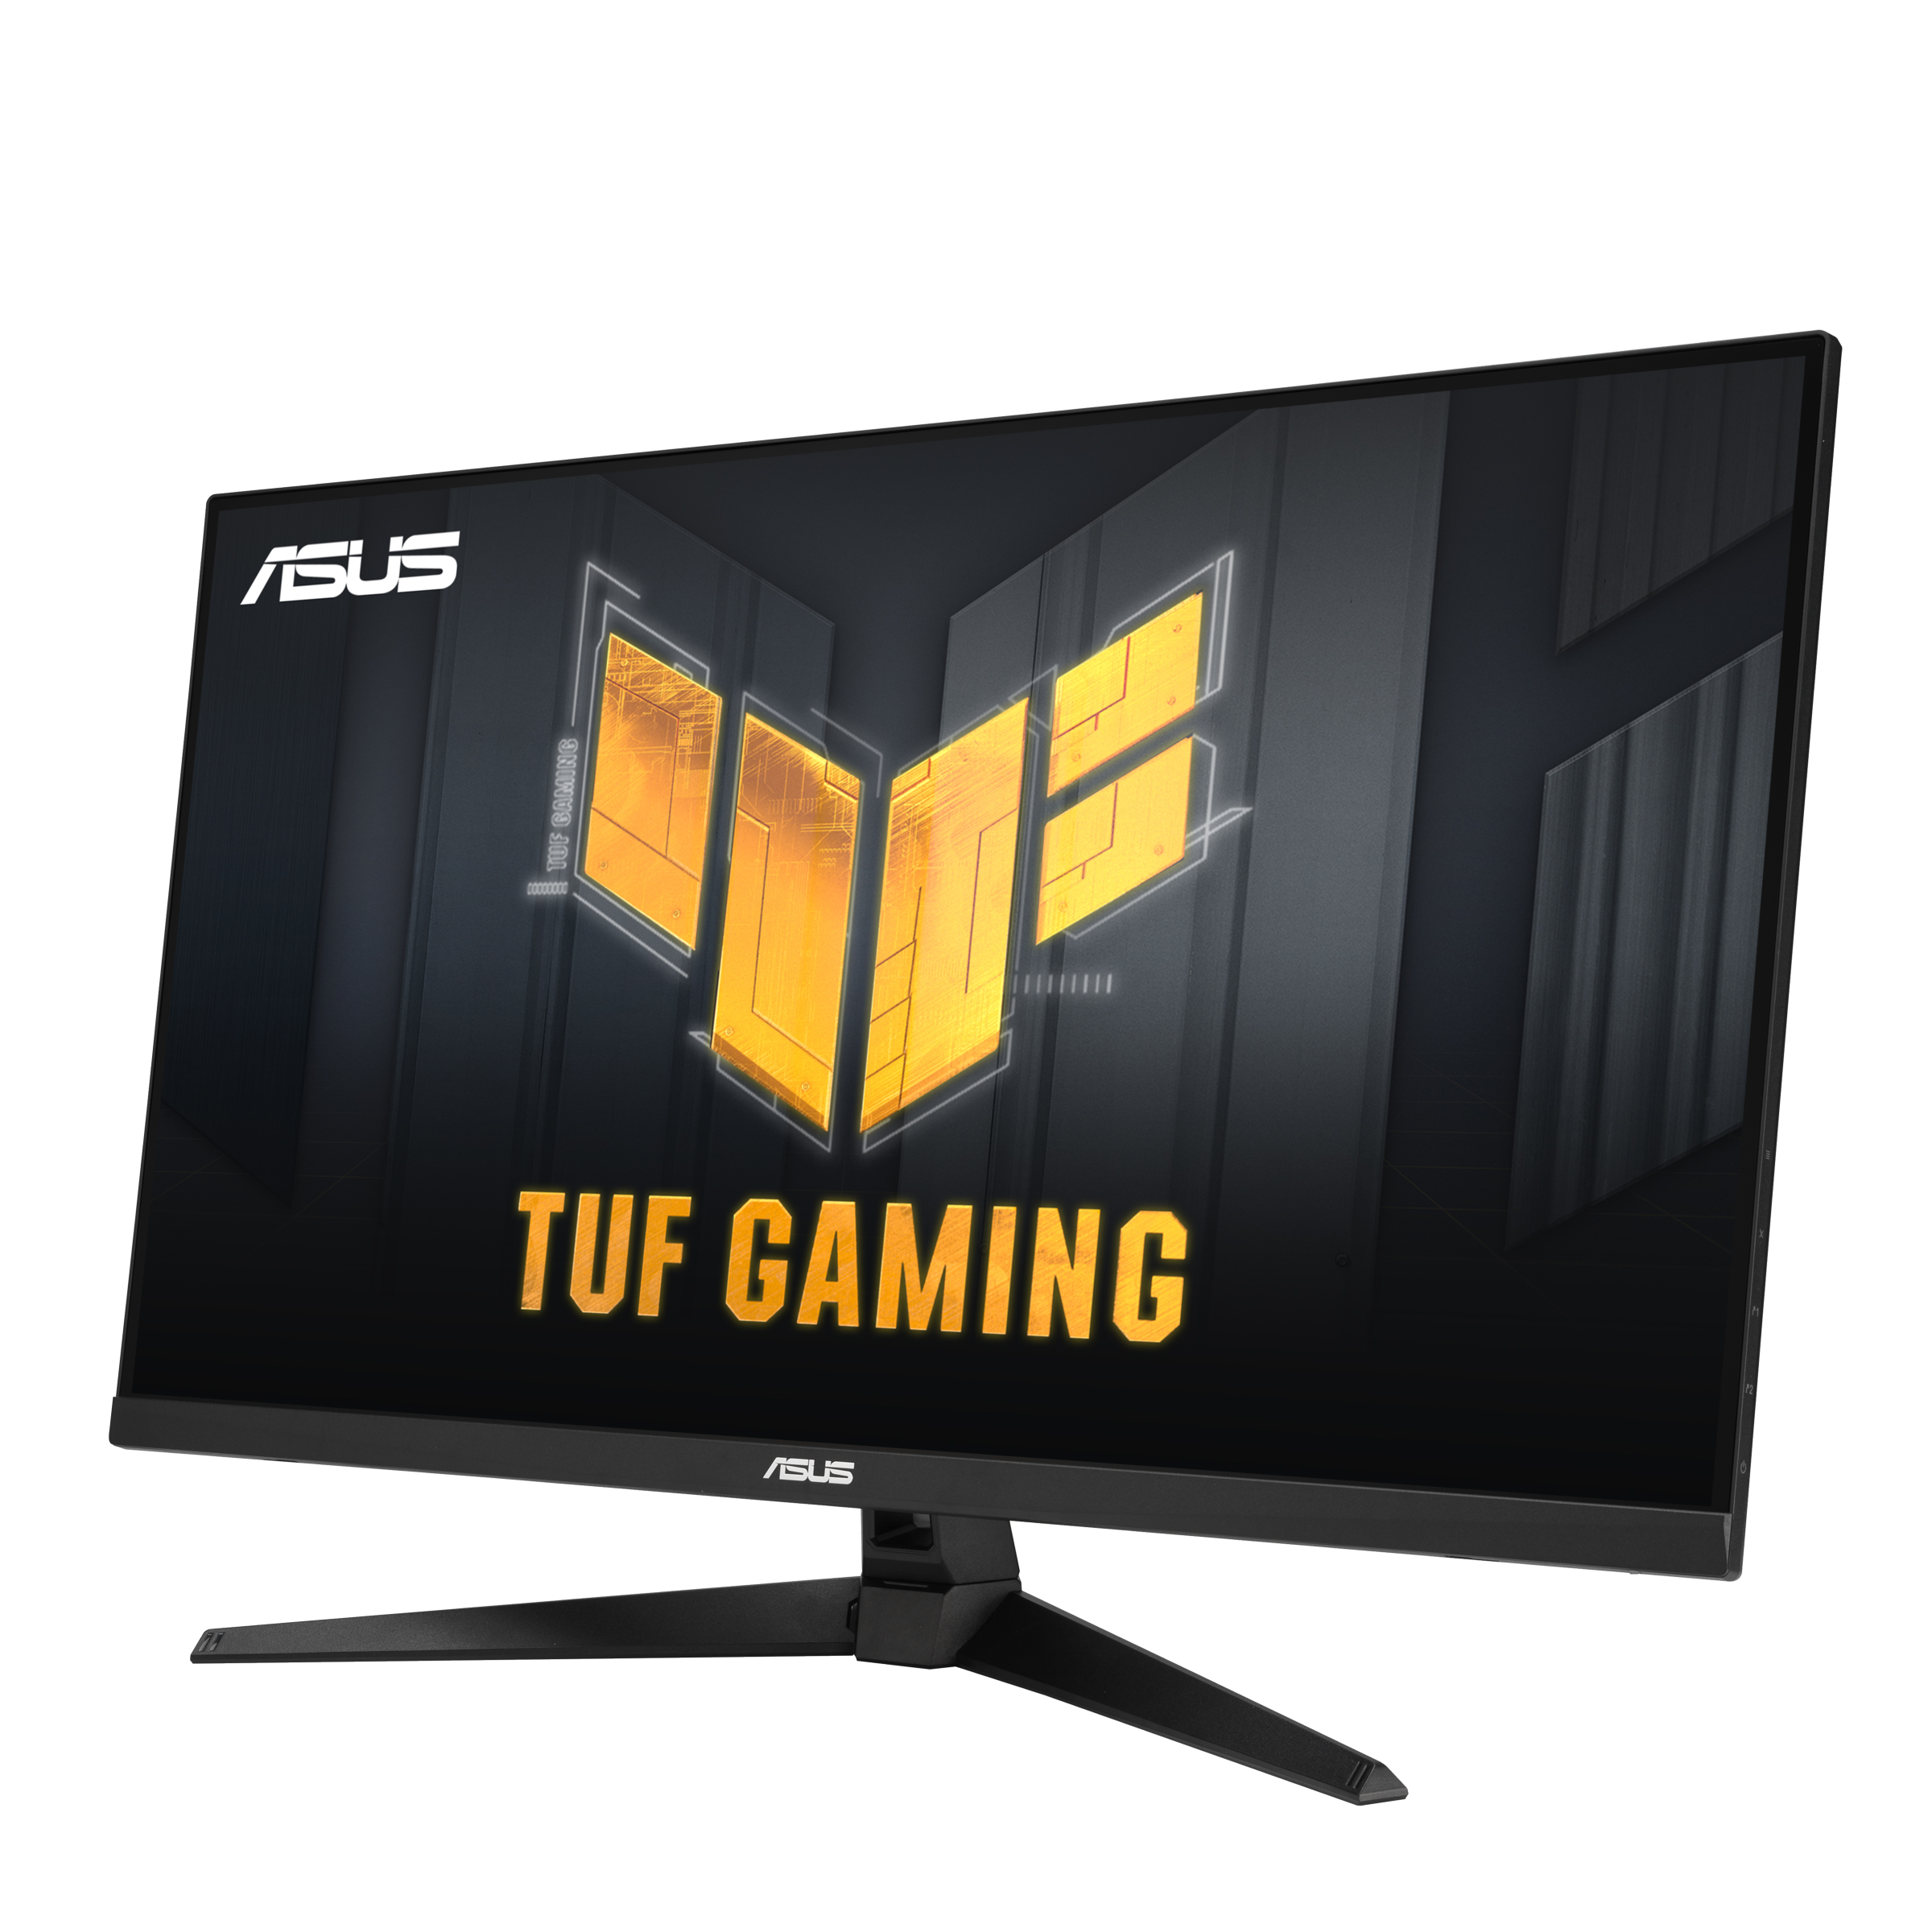 ASUS' new 32-inch monitor can handle 4K 120Hz games on next-gen